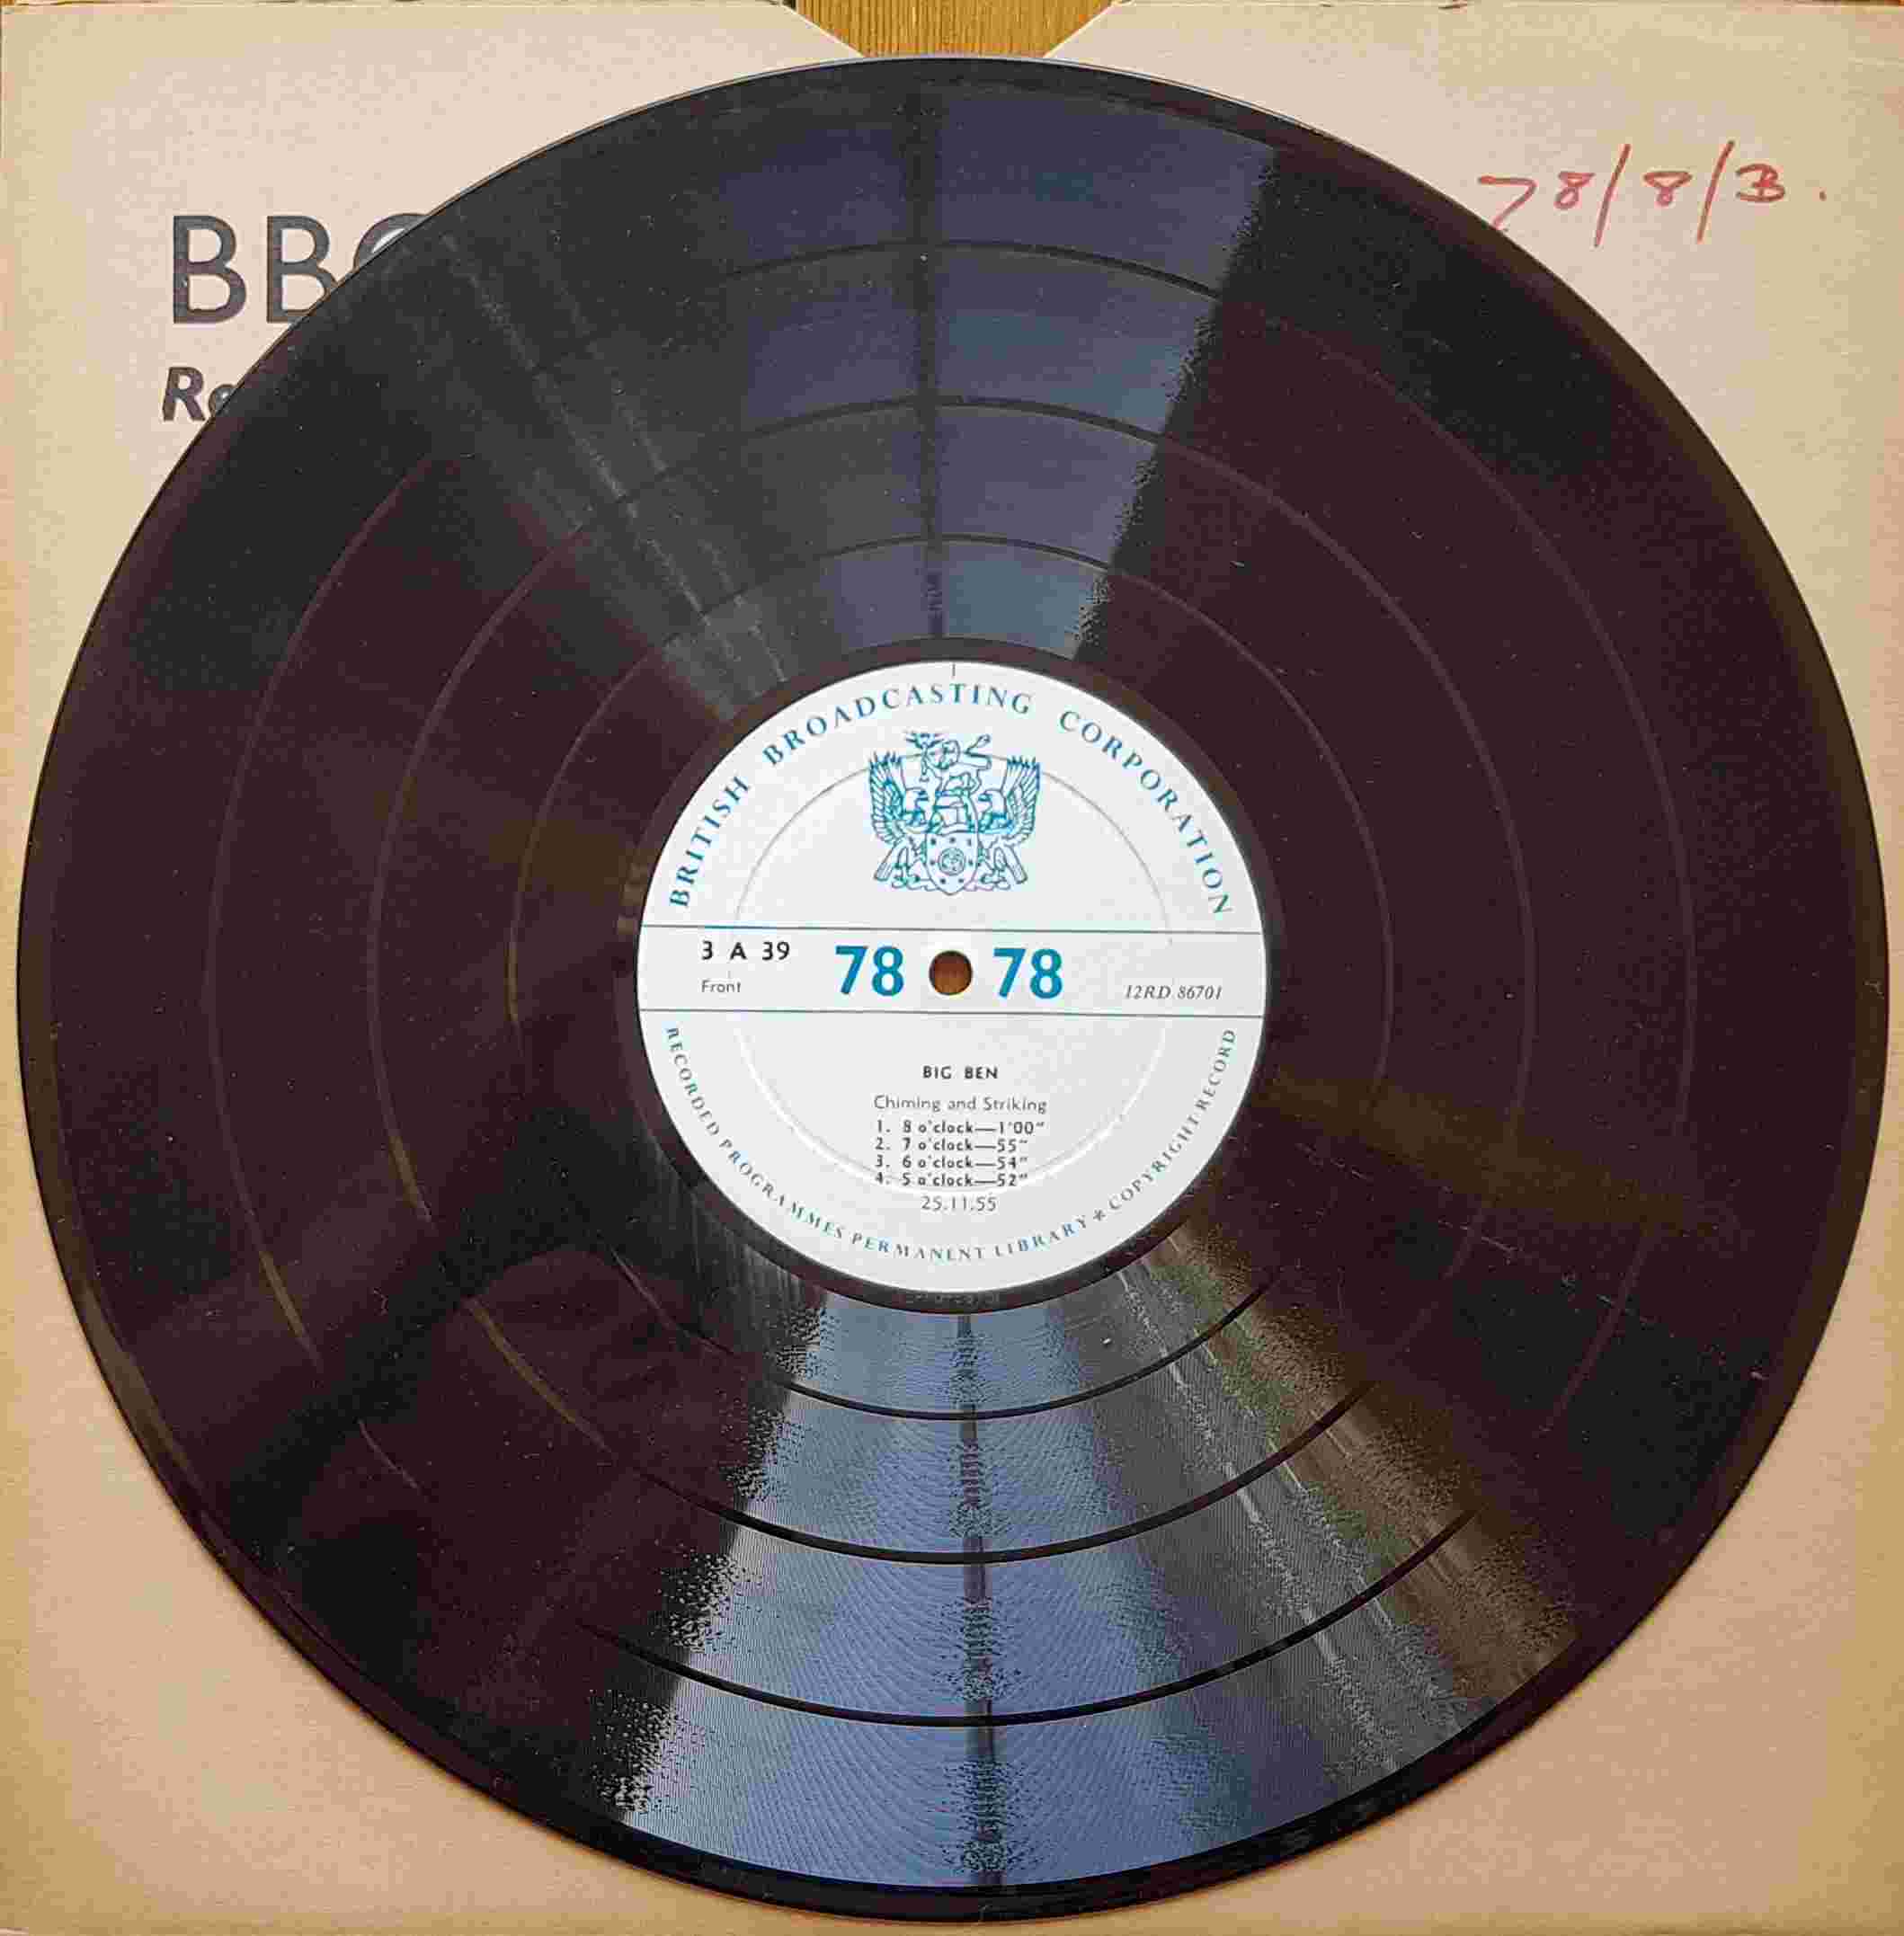 Picture of 3 A 39 Big Ben by artist Not registered from the BBC 78 - Records and Tapes library